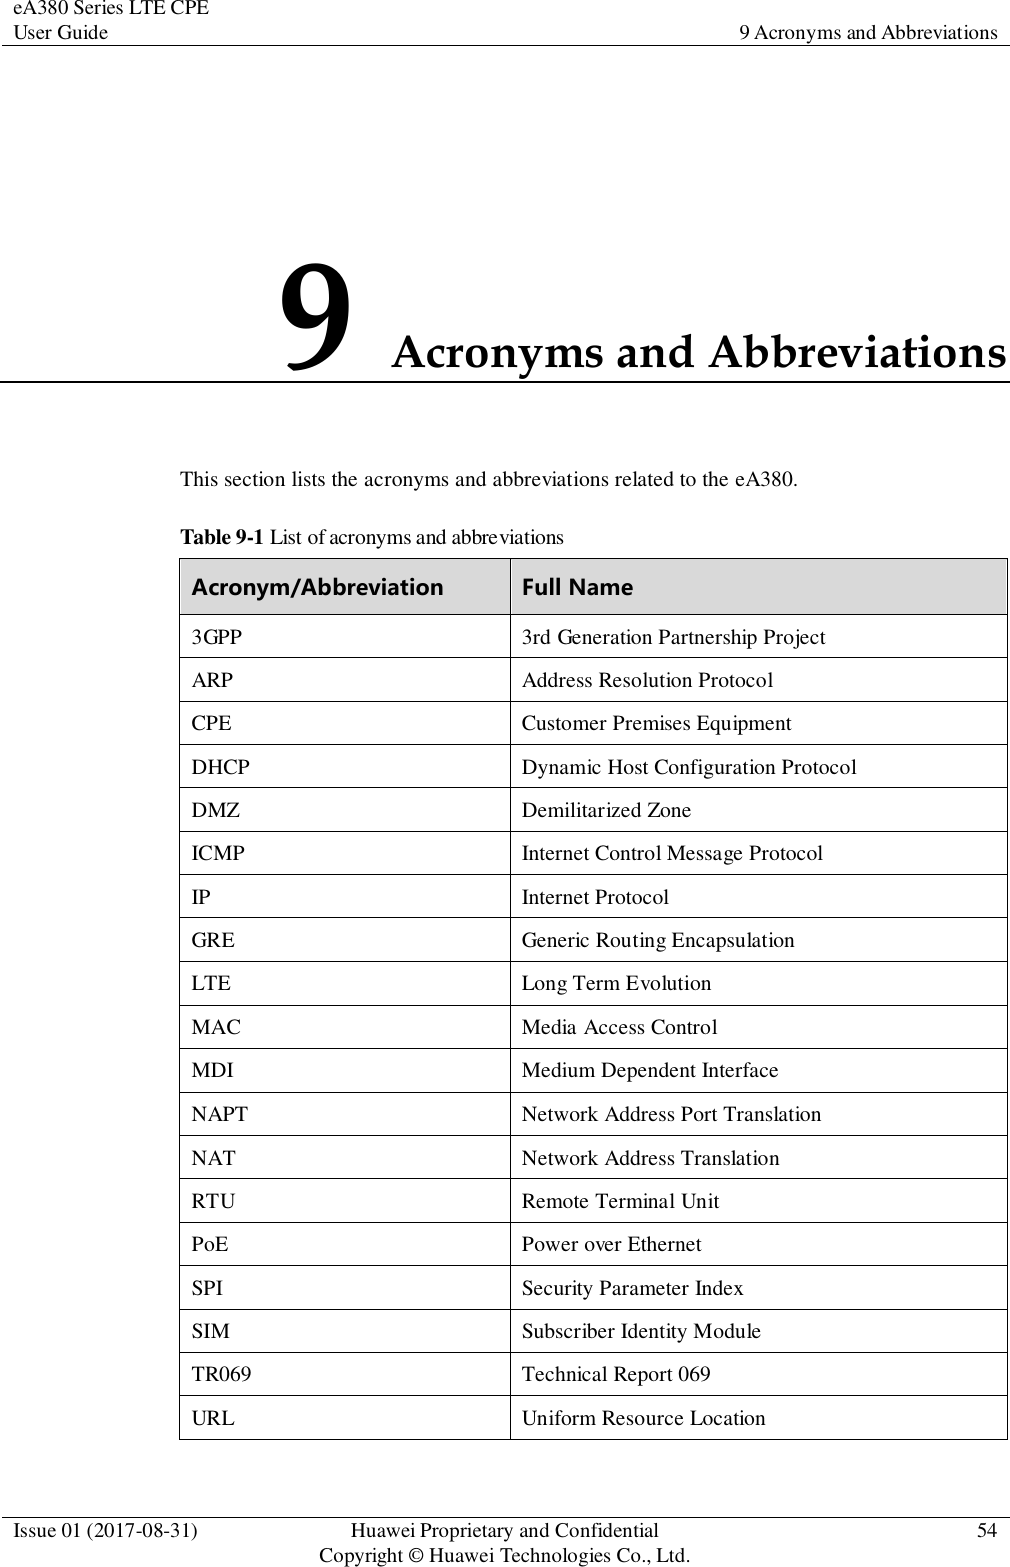 eA380 Series LTE CPE User Guide 9 Acronyms and Abbreviations  Issue 01 (2017-08-31) Huawei Proprietary and Confidential                                     Copyright © Huawei Technologies Co., Ltd. 54  9 Acronyms and Abbreviations This section lists the acronyms and abbreviations related to the eA380. Table 9-1 List of acronyms and abbreviations Acronym/Abbreviation Full Name 3GPP 3rd Generation Partnership Project ARP Address Resolution Protocol CPE Customer Premises Equipment DHCP Dynamic Host Configuration Protocol DMZ Demilitarized Zone ICMP Internet Control Message Protocol IP Internet Protocol GRE Generic Routing Encapsulation LTE Long Term Evolution MAC Media Access Control MDI Medium Dependent Interface NAPT Network Address Port Translation NAT Network Address Translation RTU Remote Terminal Unit PoE Power over Ethernet SPI Security Parameter Index SIM Subscriber Identity Module TR069 Technical Report 069 URL Uniform Resource Location 